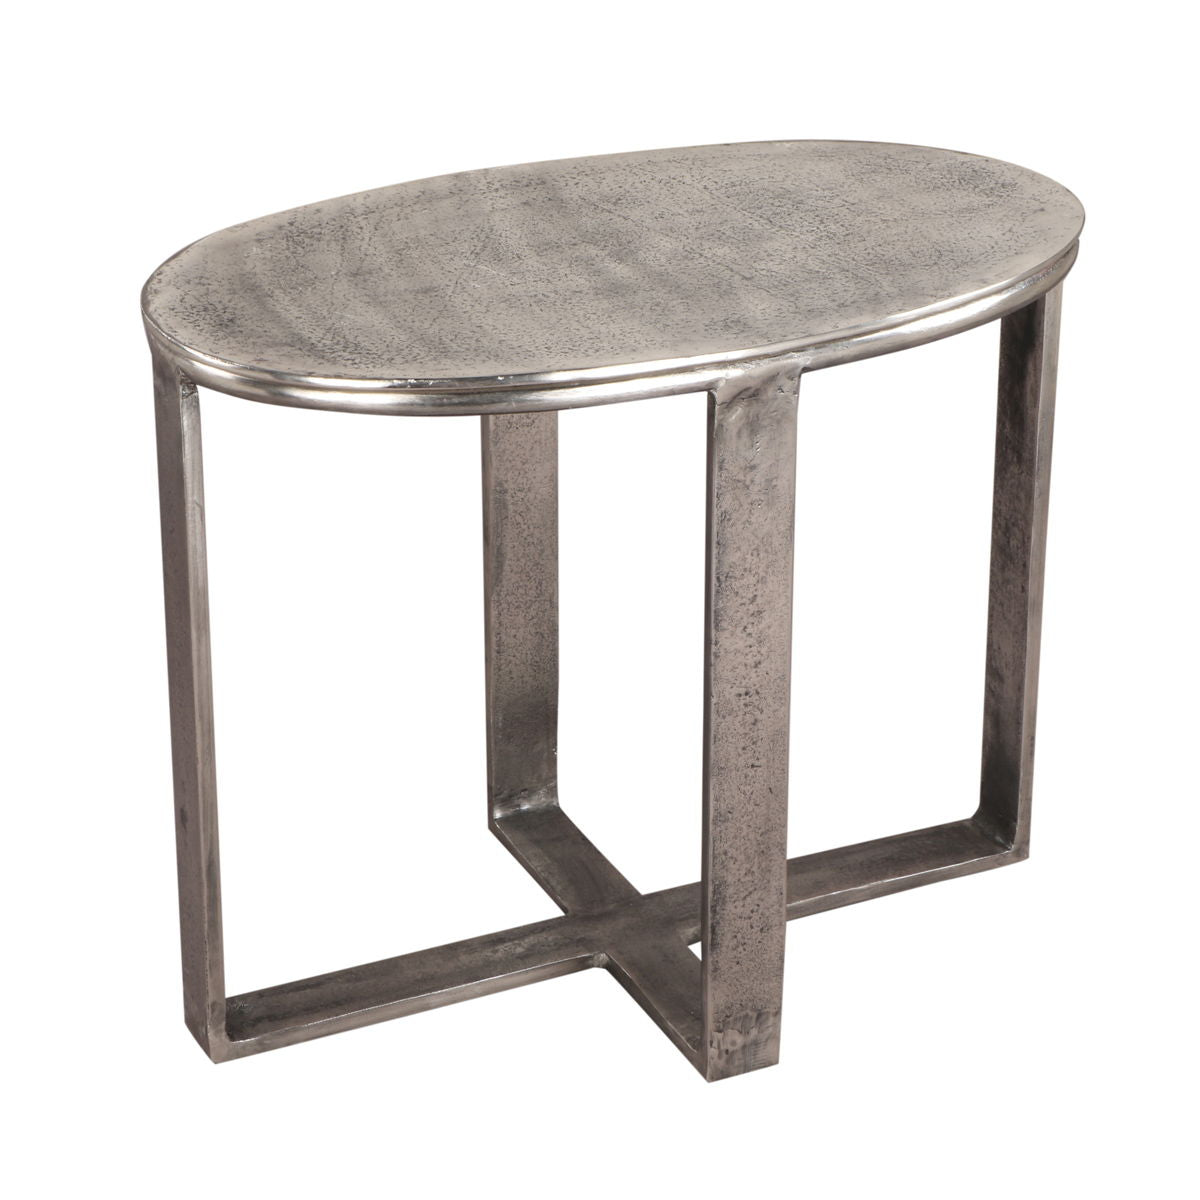 Flores - Oval End Table - Nickel Antique